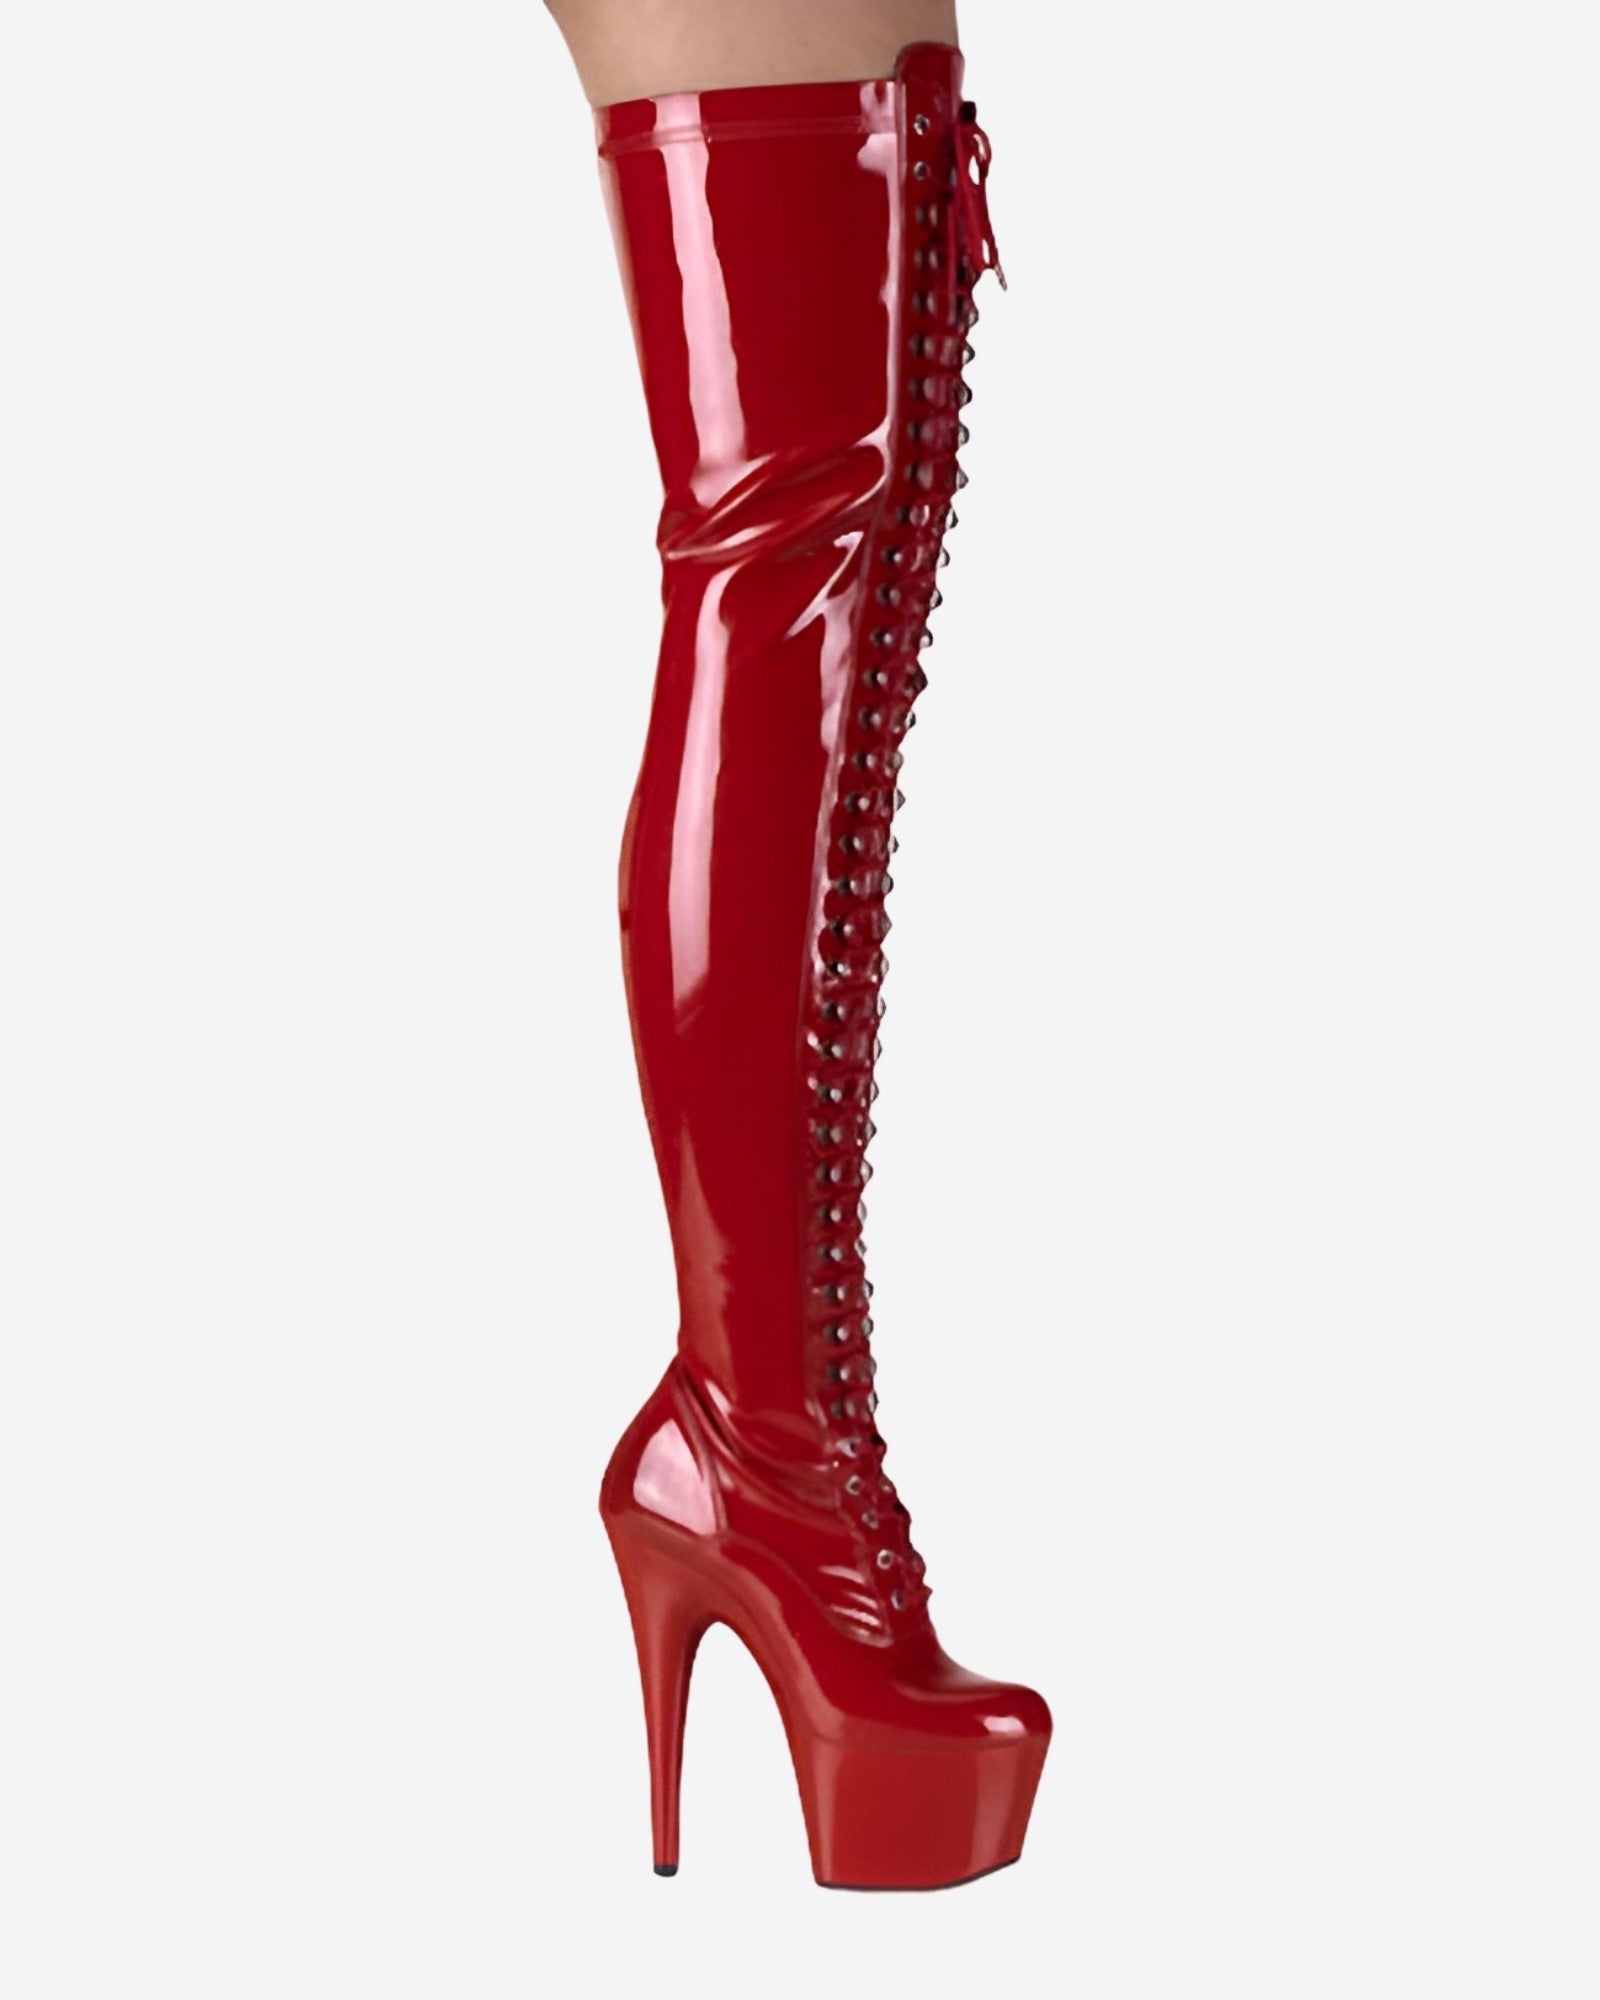 Shoes Red PVC Domina Over The Knee High heels Boots